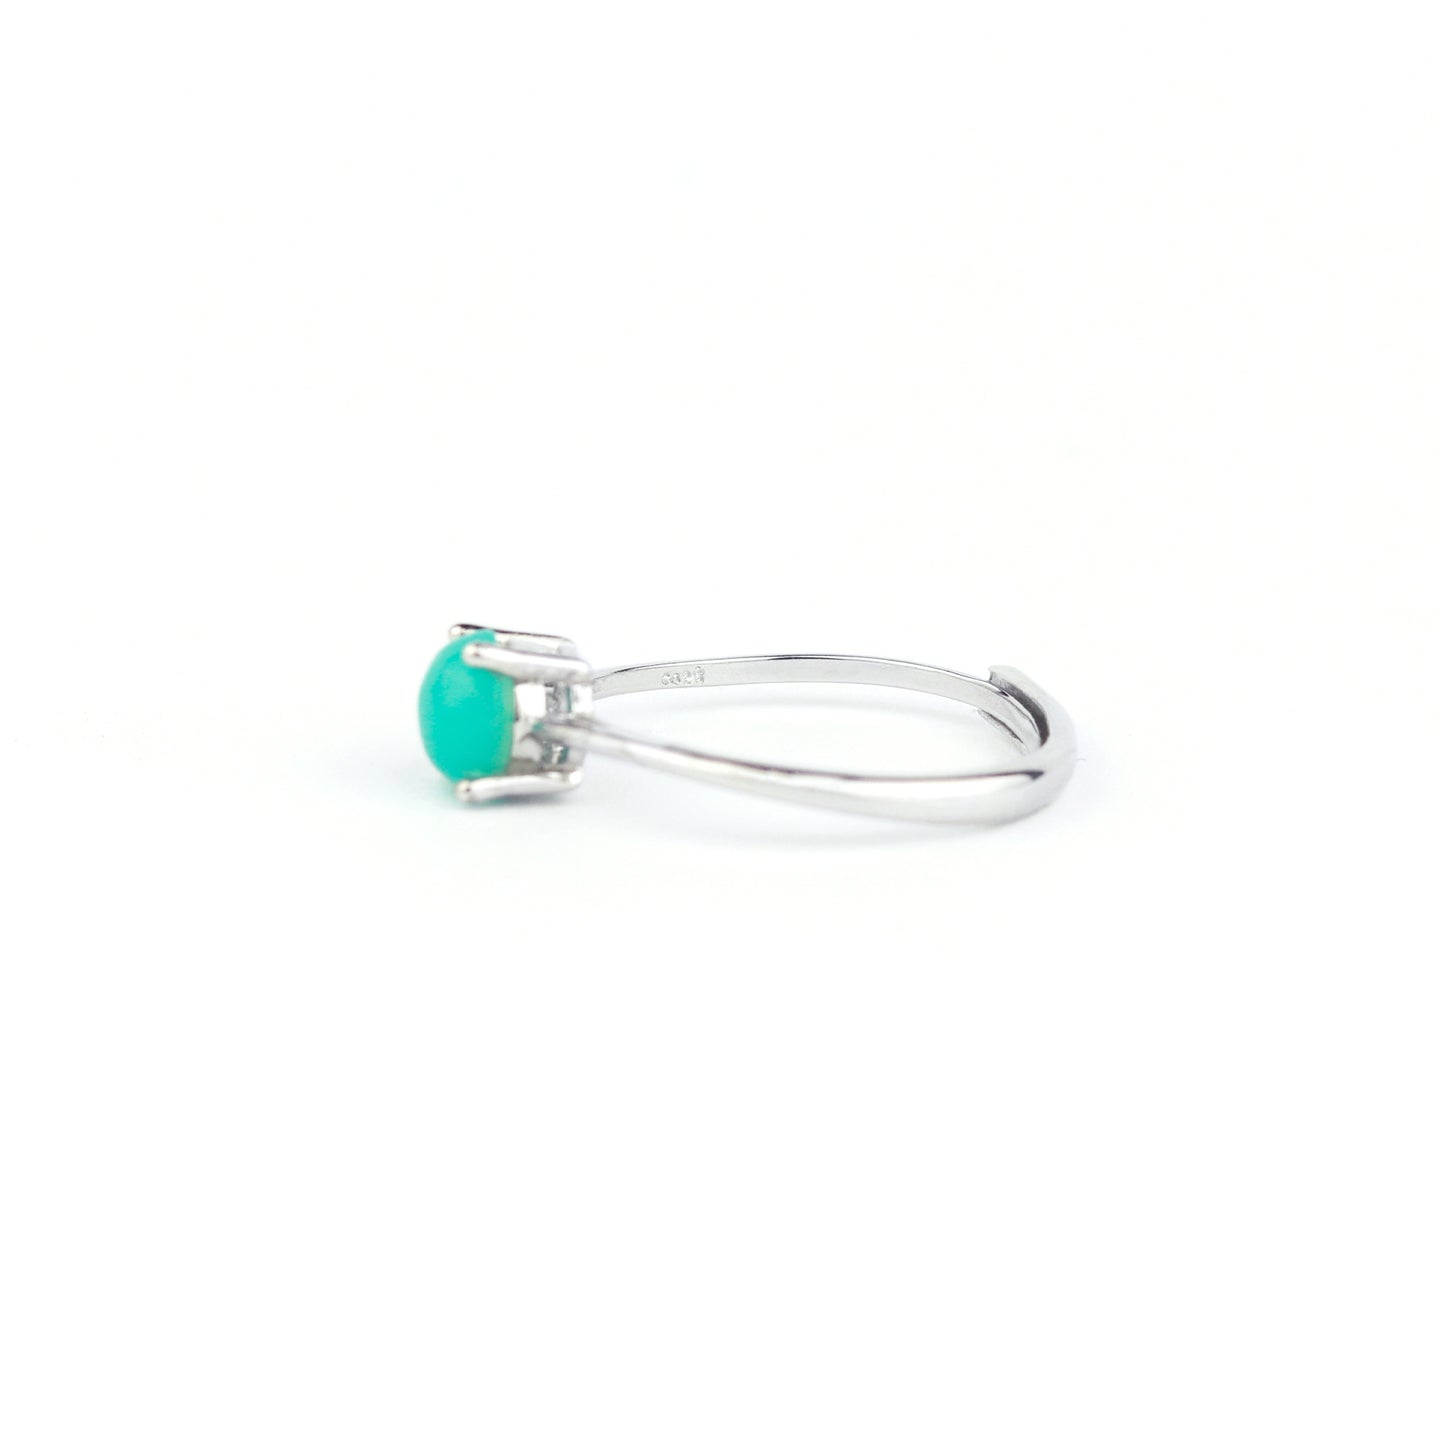 Amazonite Sterling Silver Ring 6mm Round Cabochon